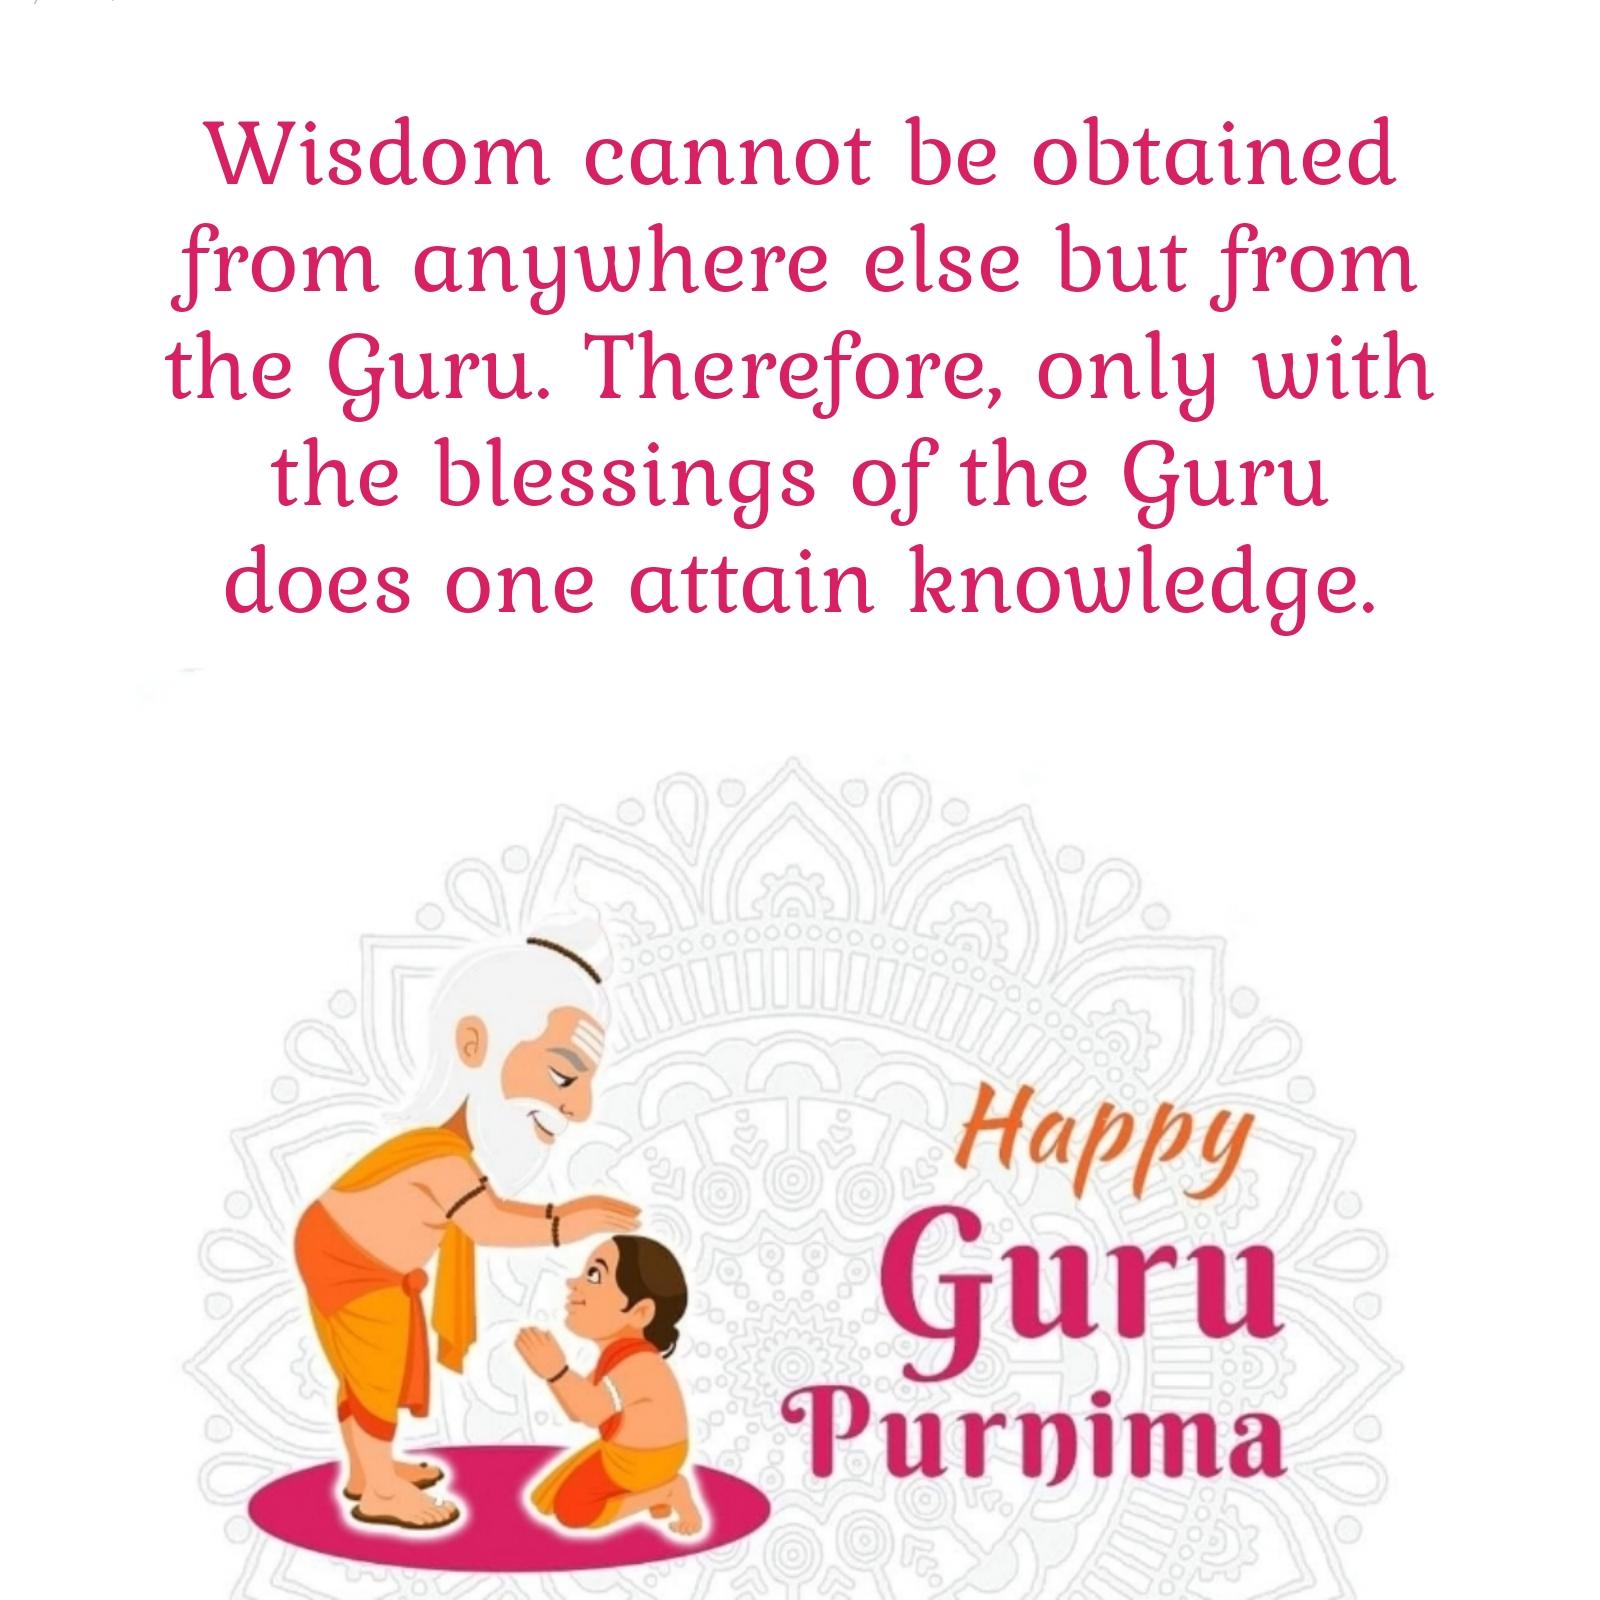 Wisdom cannot be obtained from anywhere else but from the Guru